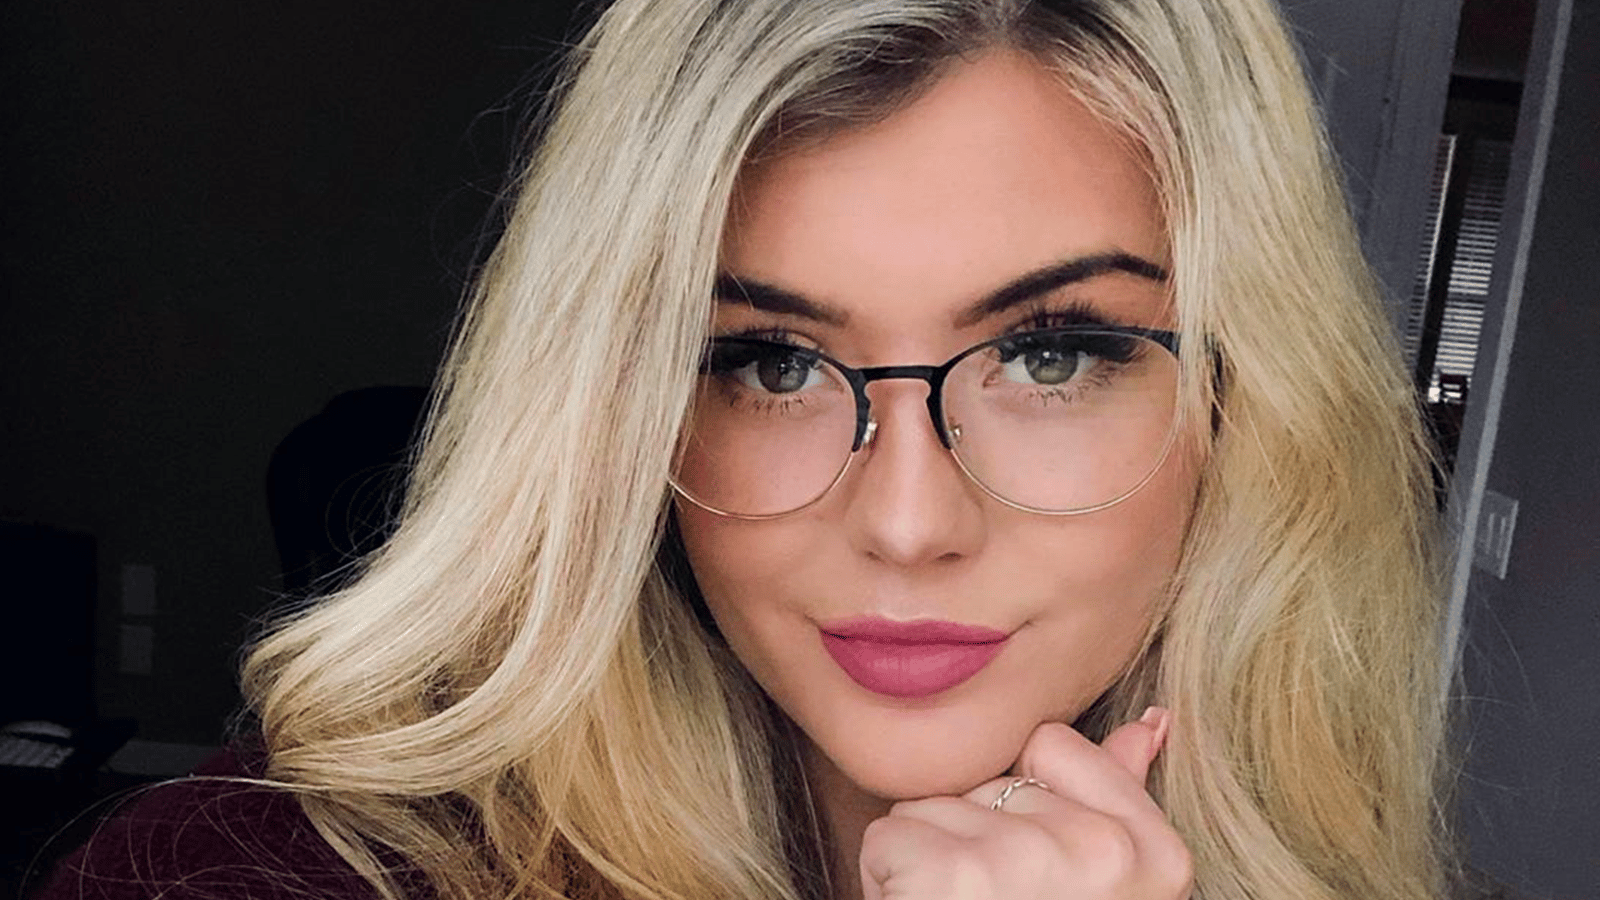 100 Thieves streamer BrookeAB revealed she's been working through something 